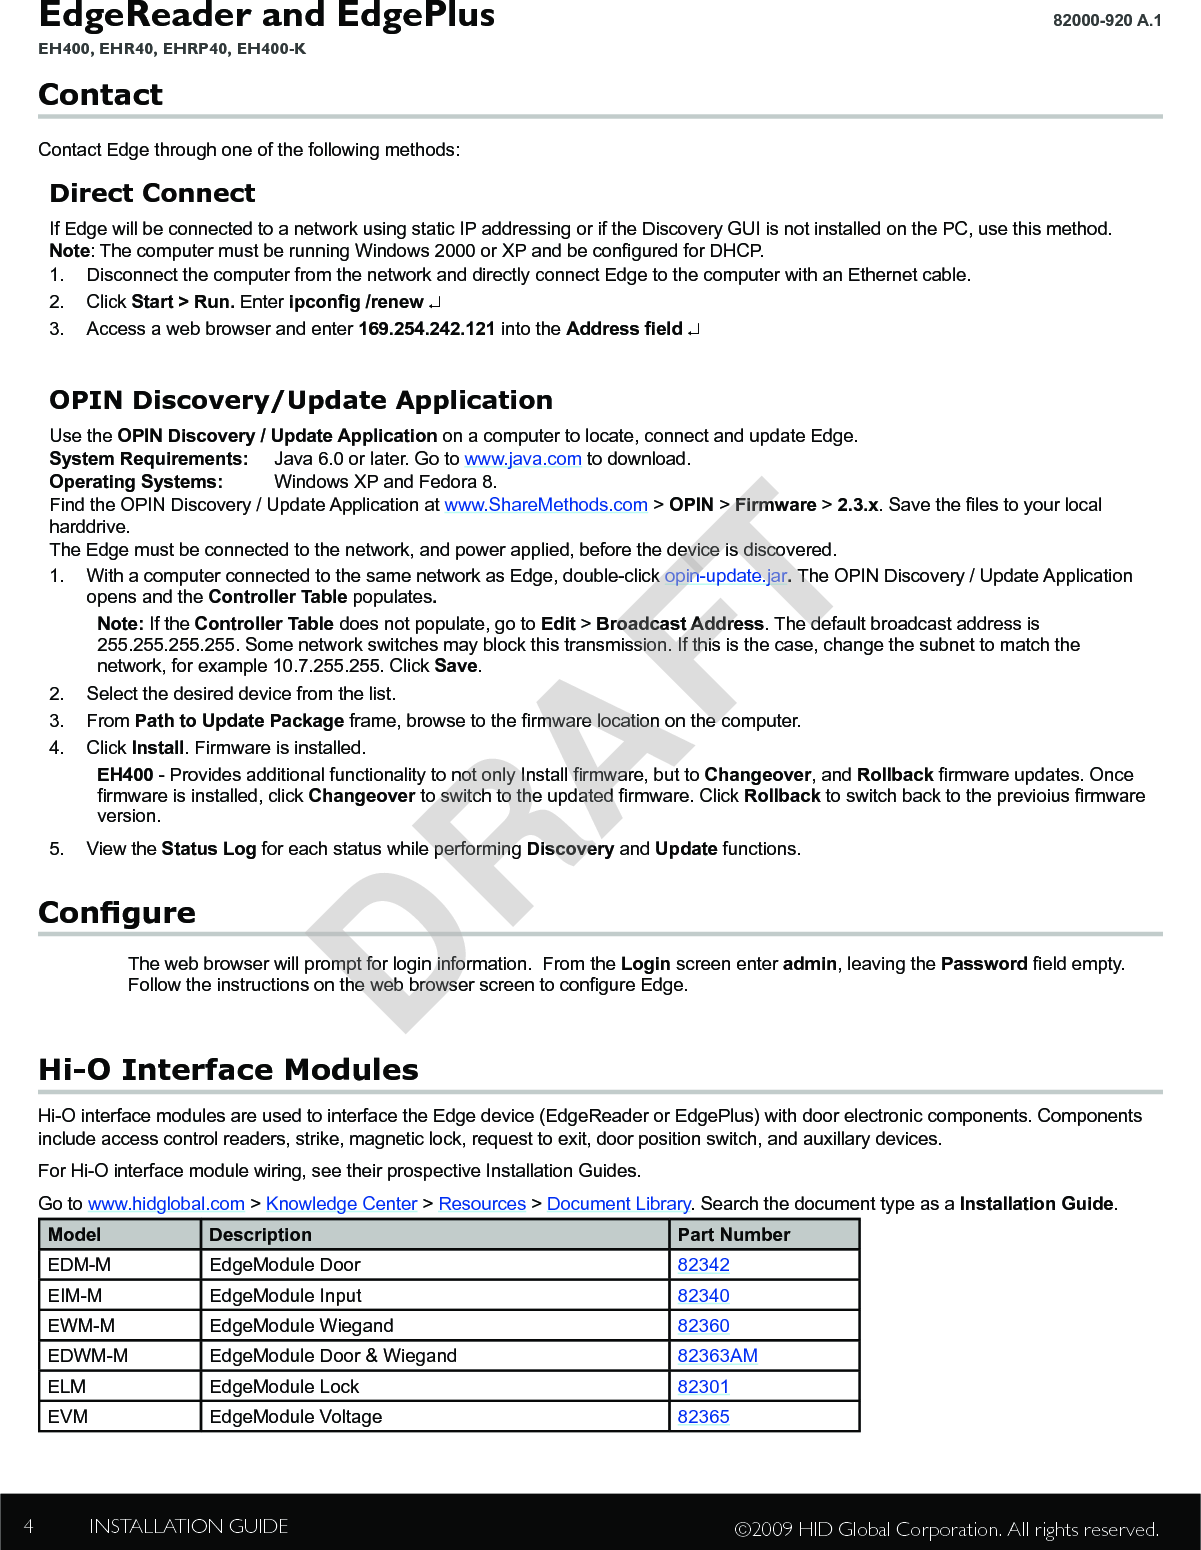 EdgeReader and EdgePlus EH400, EHR40, EHRP40, EH400-K82000-920 A.1 INSTALLATION GUIDE4©2009 HID Global Corporation. All rights reserved.ContactContact Edge through one of the following methods:Direct ConnectIf Edge will be connected to a network using static IP addressing or if the Discovery GUI is not installed on the PC, use this method.Note: The computer must be running Windows 2000 or XP and be congured for DHCP.1.  Disconnect the computer from the network and directly connect Edge to the computer with an Ethernet cable.2.  Click Start &gt; Run. Enter ipcong /renew ↵3.  Access a web browser and enter 169.254.242.121 into the Address eld ↵OPIN Discovery/Update ApplicationUse the OPIN Discovery / Update Application on a computer to locate, connect and update Edge.  System Requirements:  Java 6.0 or later. Go to www.java.com to download.Operating Systems:  Windows XP and Fedora 8.Find the OPIN Discovery / Update Application at www.ShareMethods.com &gt; OPIN &gt; Firmware &gt; 2.3.x. Save the les to your local harddrive.The Edge must be connected to the network, and power applied, before the device is discovered.1.  With a computer connected to the same network as Edge, double-click opin-update.jar. The OPIN Discovery / Update Application opens and the Controller Table populates.Note: If the Controller Table does not populate, go to Edit &gt; Broadcast Address. The default broadcast address is 255.255.255.255. Some network switches may block this transmission. If this is the case, change the subnet to match the network, for example 10.7.255.255. Click Save.2.  Select the desired device from the list.3.  From Path to Update Package frame, browse to the rmware location on the computer.4.  Click Install. Firmware is installed.EH400 - Provides additional functionality to not only Install rmware, but to Changeover, and Rollback rmware updates. Once rmware is installed, click Changeover to switch to the updated rmware. Click Rollback to switch back to the previoius rmware version.5.  View the Status Log for each status while performing Discovery and Update functions.CongureThe web browser will prompt for login information.  From the Login screen enter admin, leaving the Password eld empty.  Follow the instructions on the web browser screen to congure Edge.Hi-O Interface ModulesHi-O interface modules are used to interface the Edge device (EdgeReader or EdgePlus) with door electronic components. Components include access control readers, strike, magnetic lock, request to exit, door position switch, and auxillary devices.For Hi-O interface module wiring, see their prospective Installation Guides.Go to www.hidglobal.com &gt; Knowledge Center &gt; Resources &gt; Document Library. Search the document type as a Installation Guide.Model Description Part NumberEDM-M EdgeModule Door 82342EIM-M EdgeModule Input 82340EWM-M EdgeModule Wiegand 82360EDWM-M EdgeModule Door &amp; Wiegand 82363AMELM EdgeModule Lock 82301EVM EdgeModule Voltage 82365DRAFT